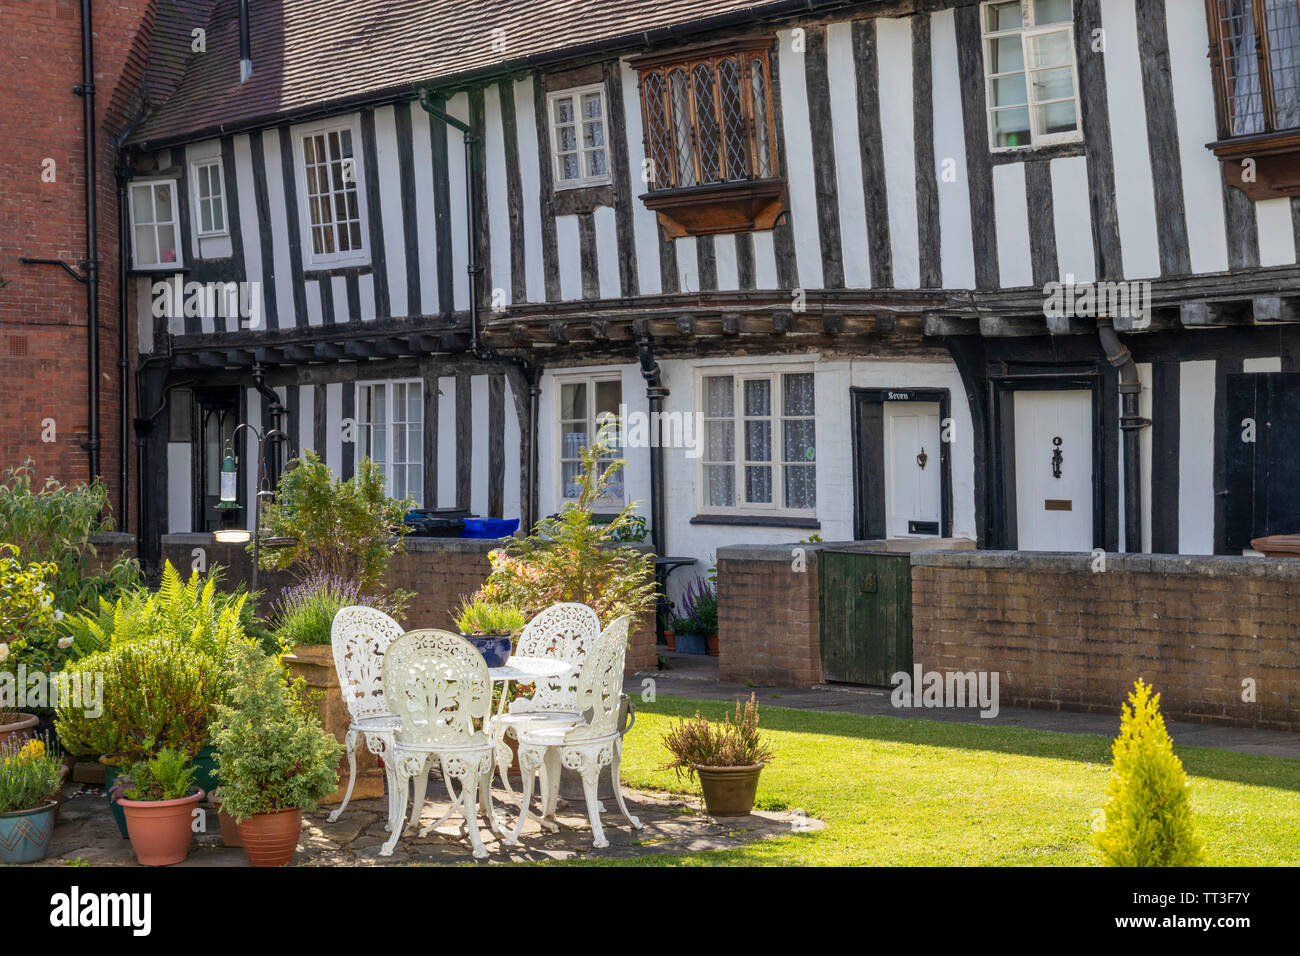 Vicars' Close is part of the Close surrounding the Cathedral medieval  historic half timbered buildings and gardens Lichfield Staffordshire UK GB Stock Photo